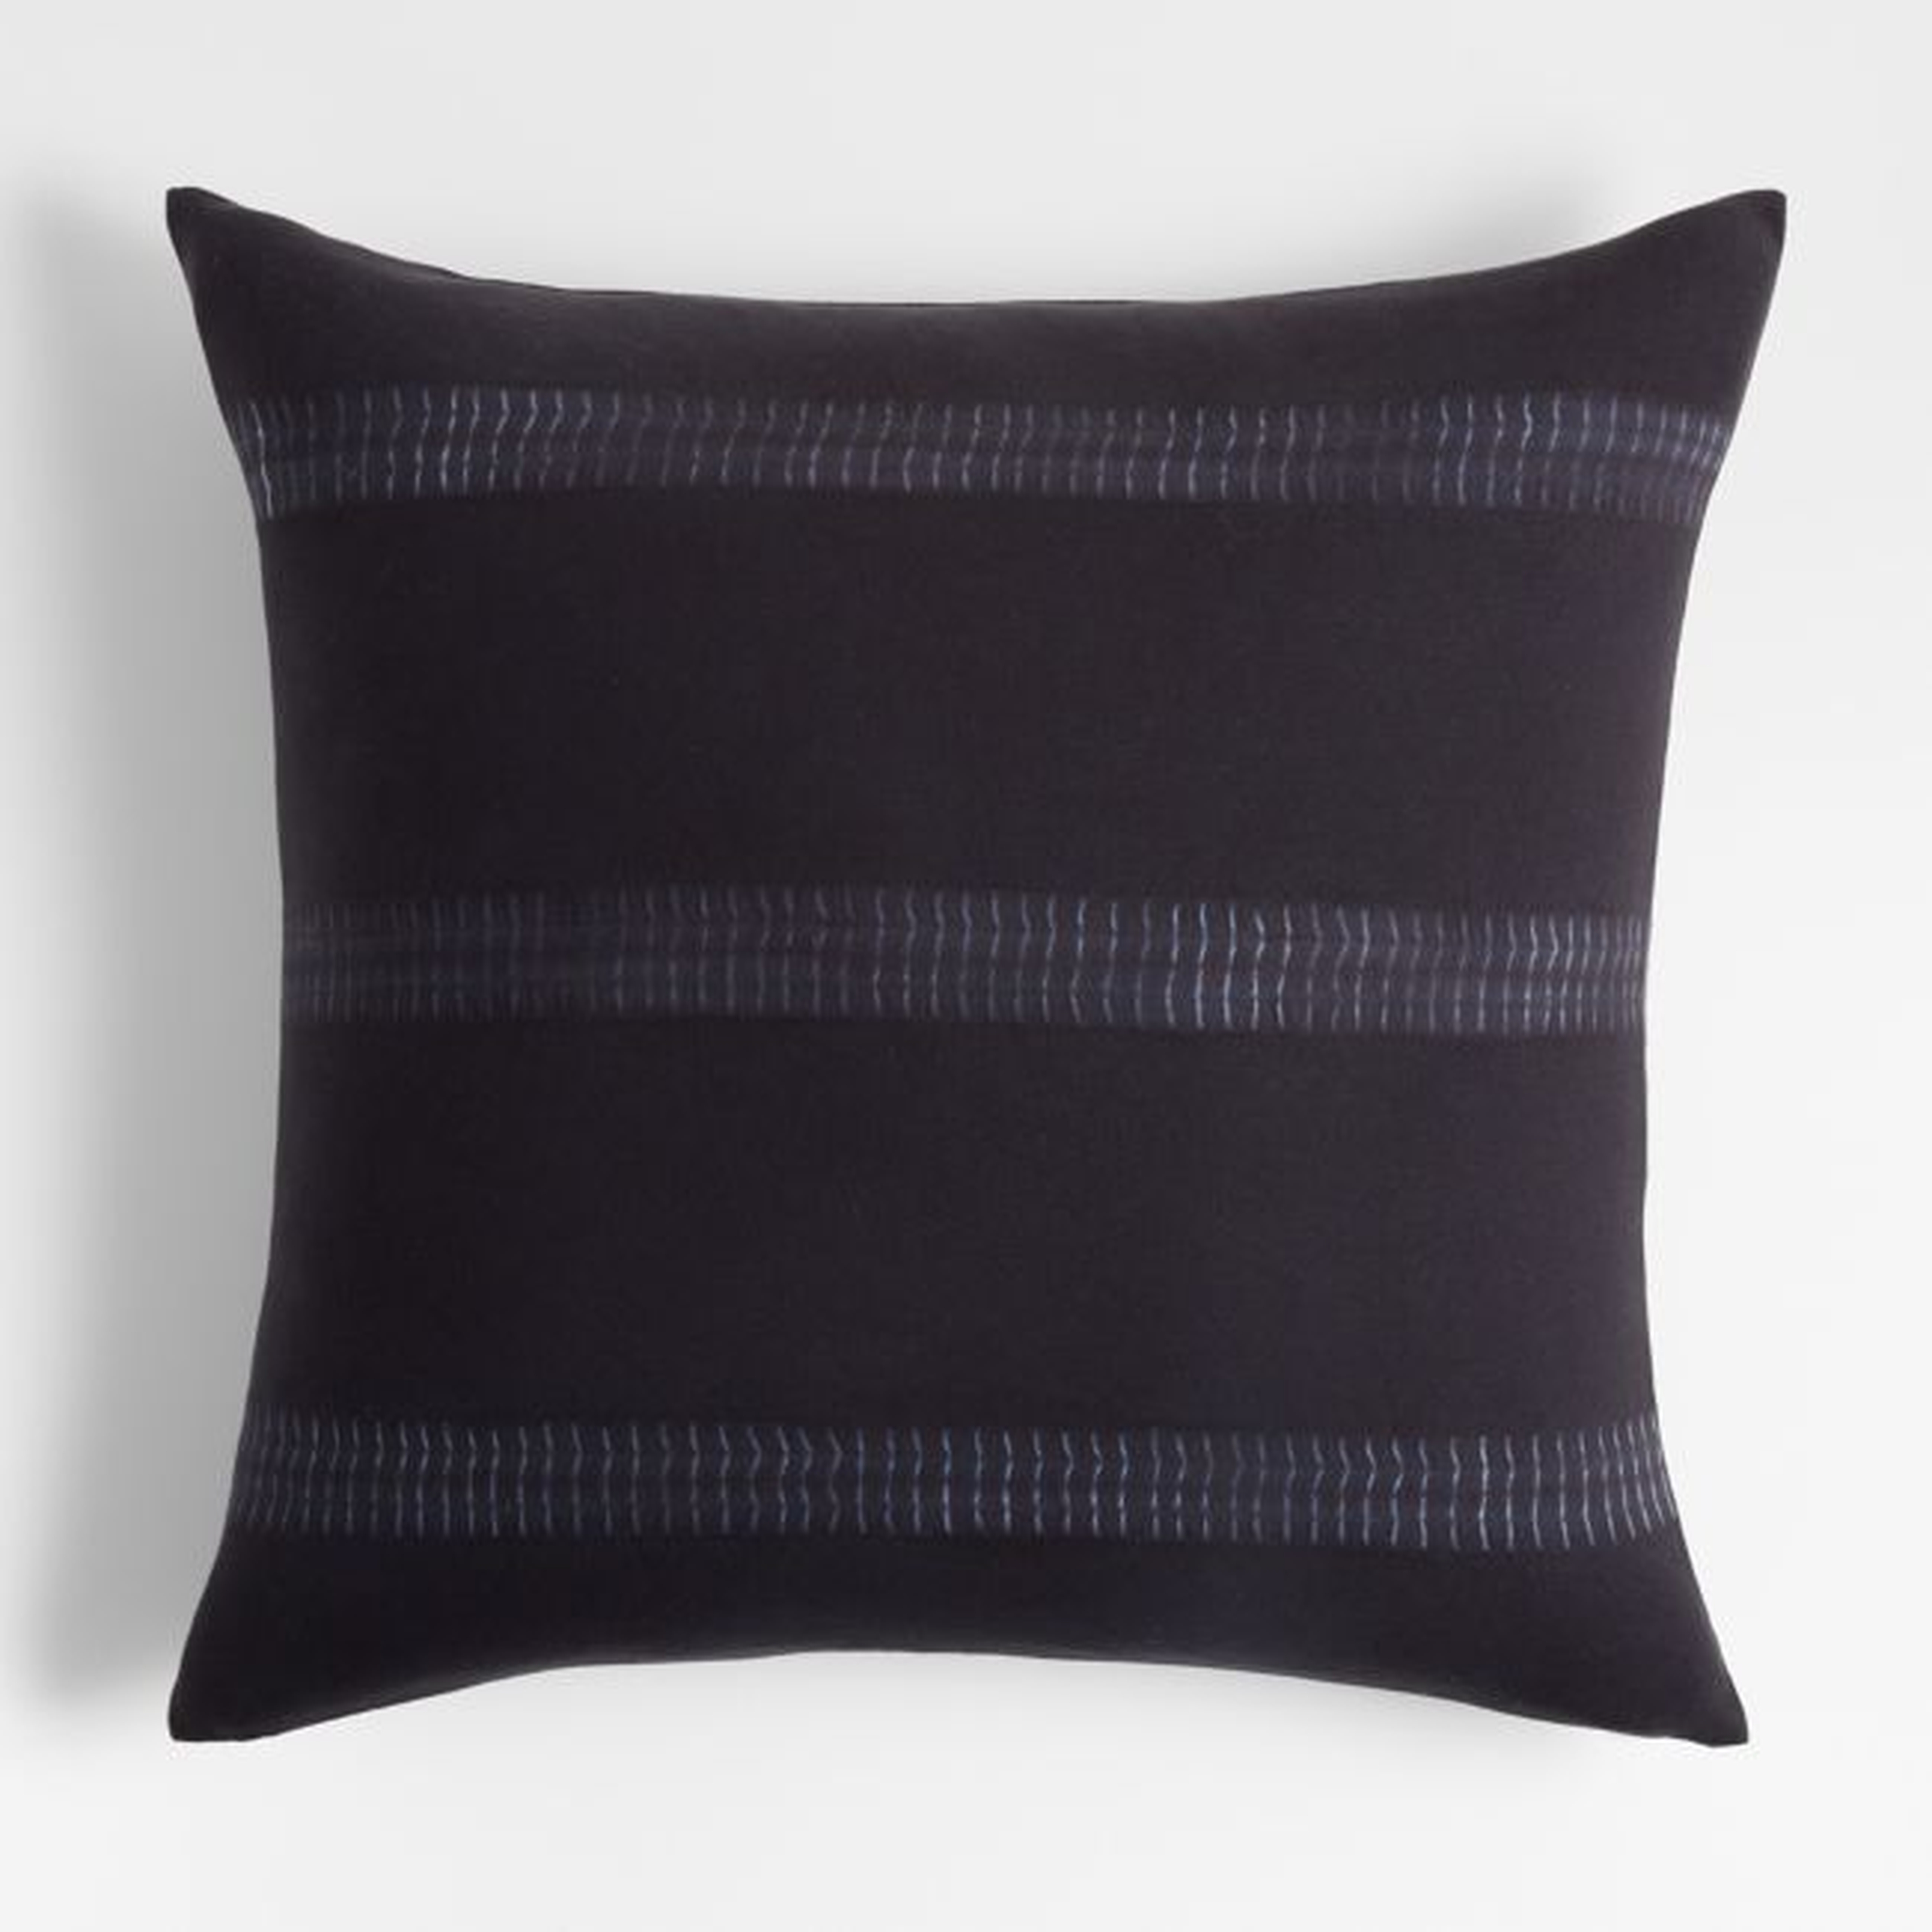 Antibes 23"x23" Tie Dye Navy Throw Pillow Cover - Crate and Barrel